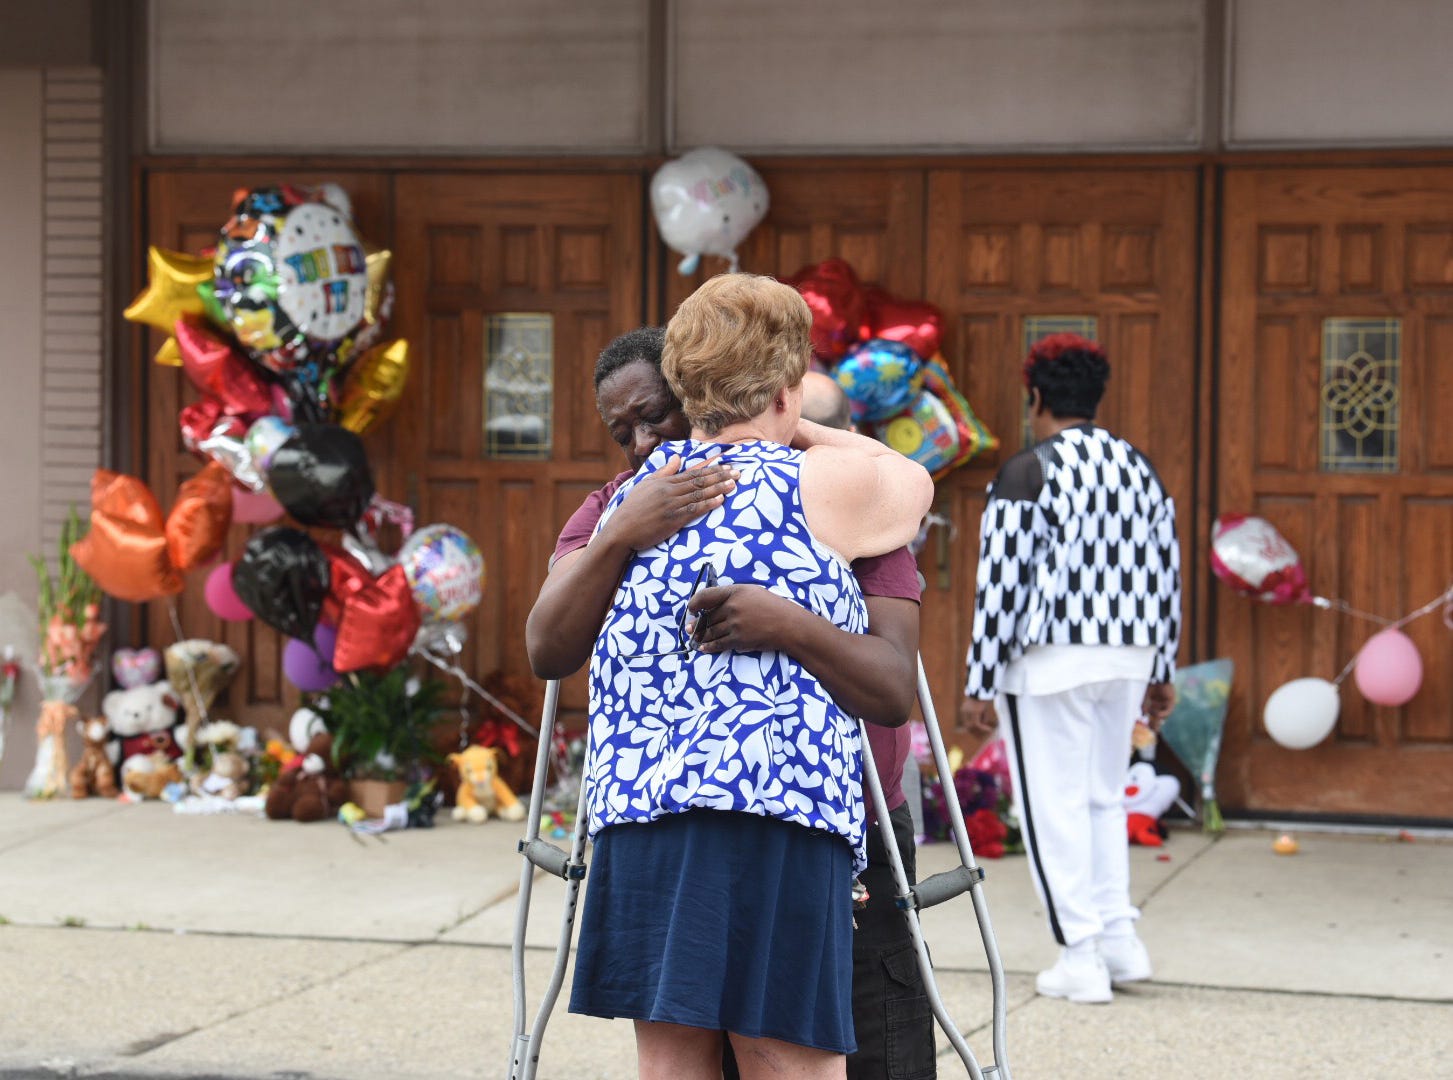 Terence Blair of Detroit hugs Melody Hause of Auburn Hills as they grieve outside the New Bethel Baptist Church in Detroit, where memorials to Aretha Franklin were collecting on Friday, August 17, 2018.